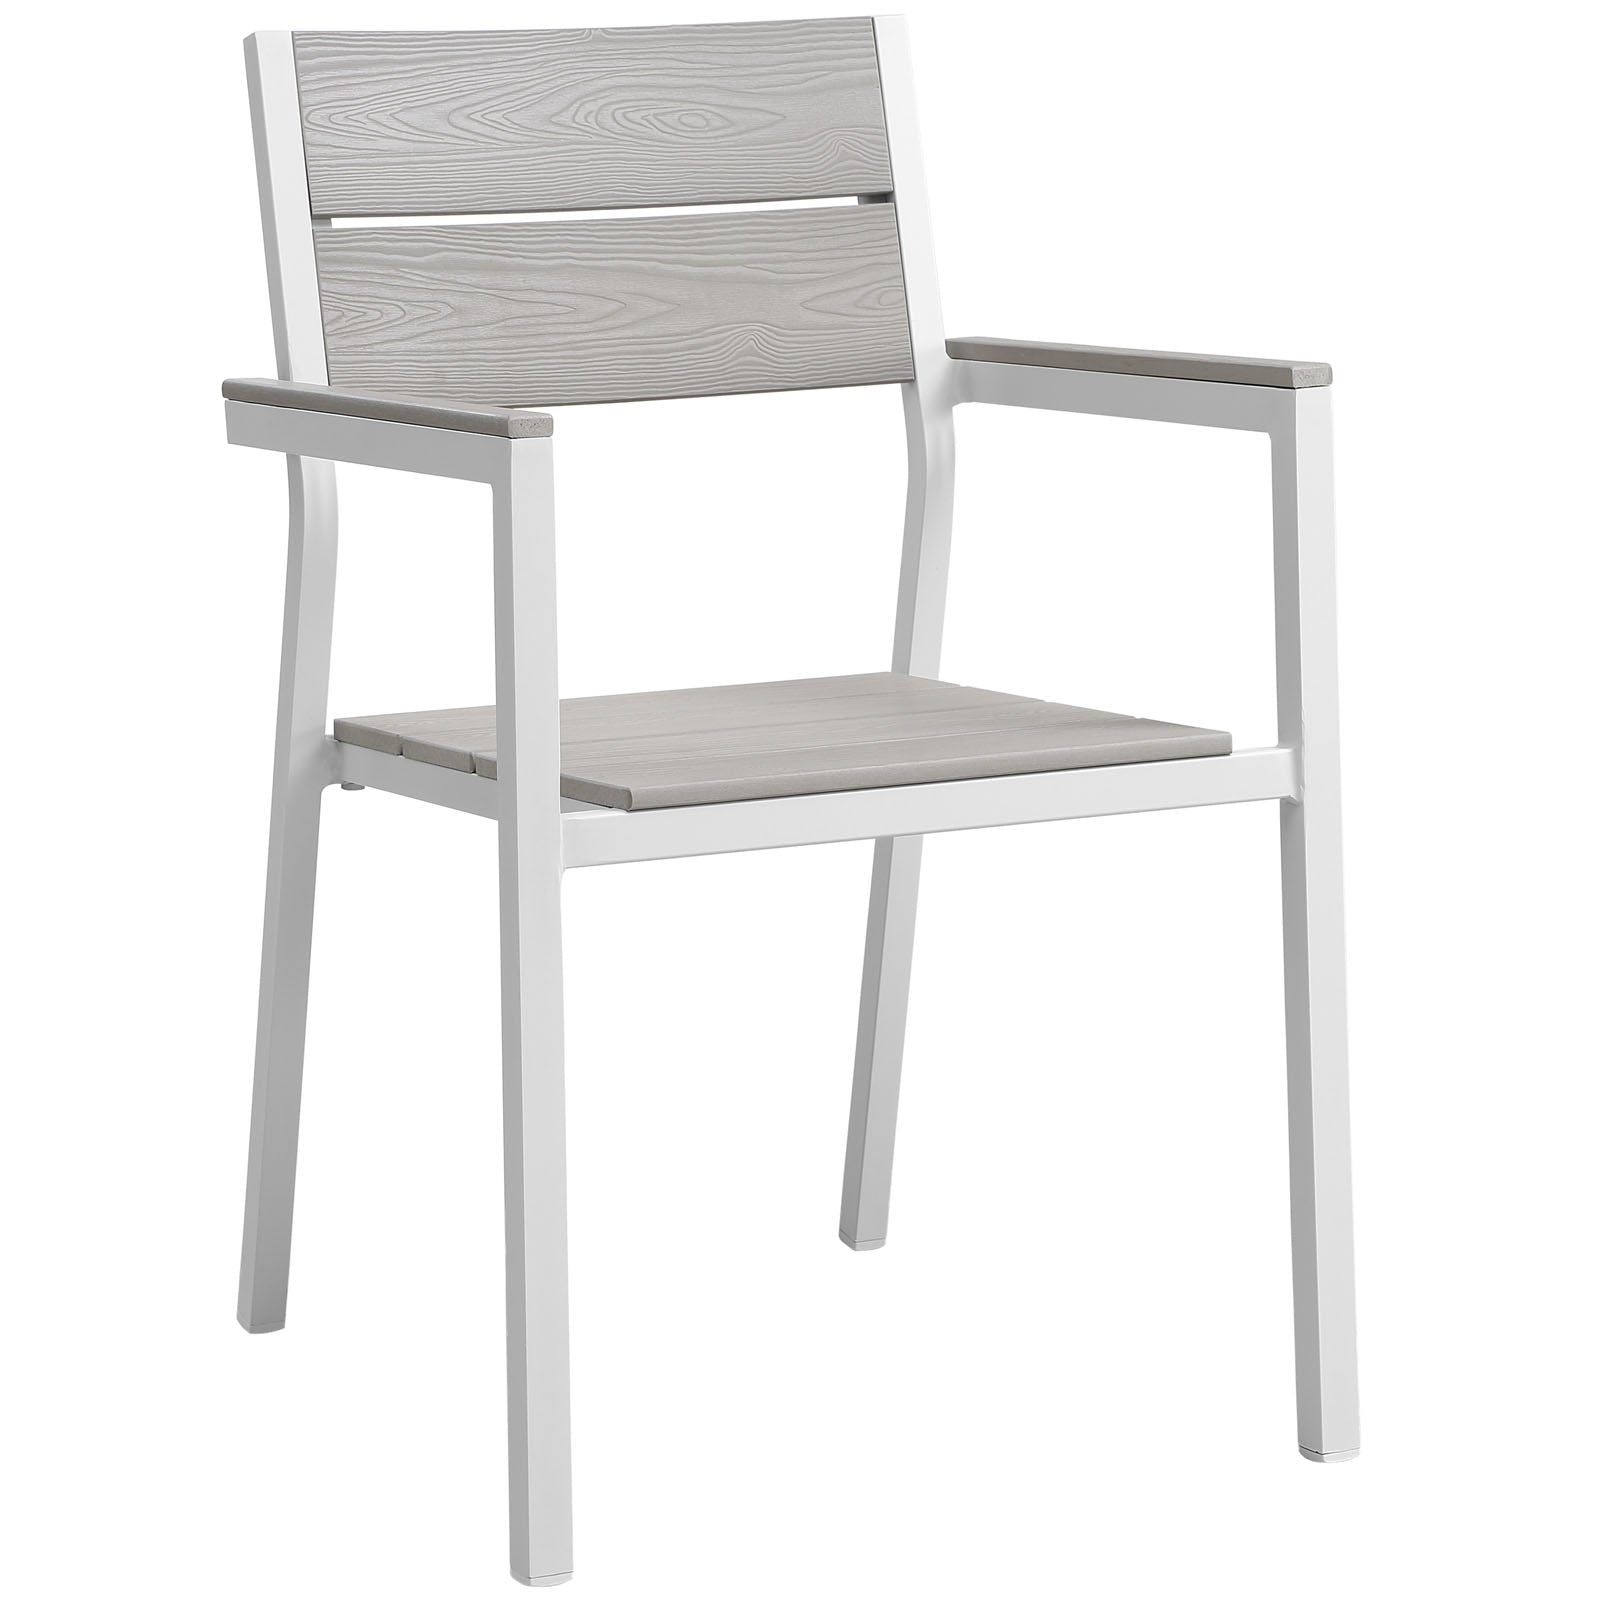 Modway Outdoor Dining Chairs - Maine Outdoor Patio Dining Armchair White & Light Gray